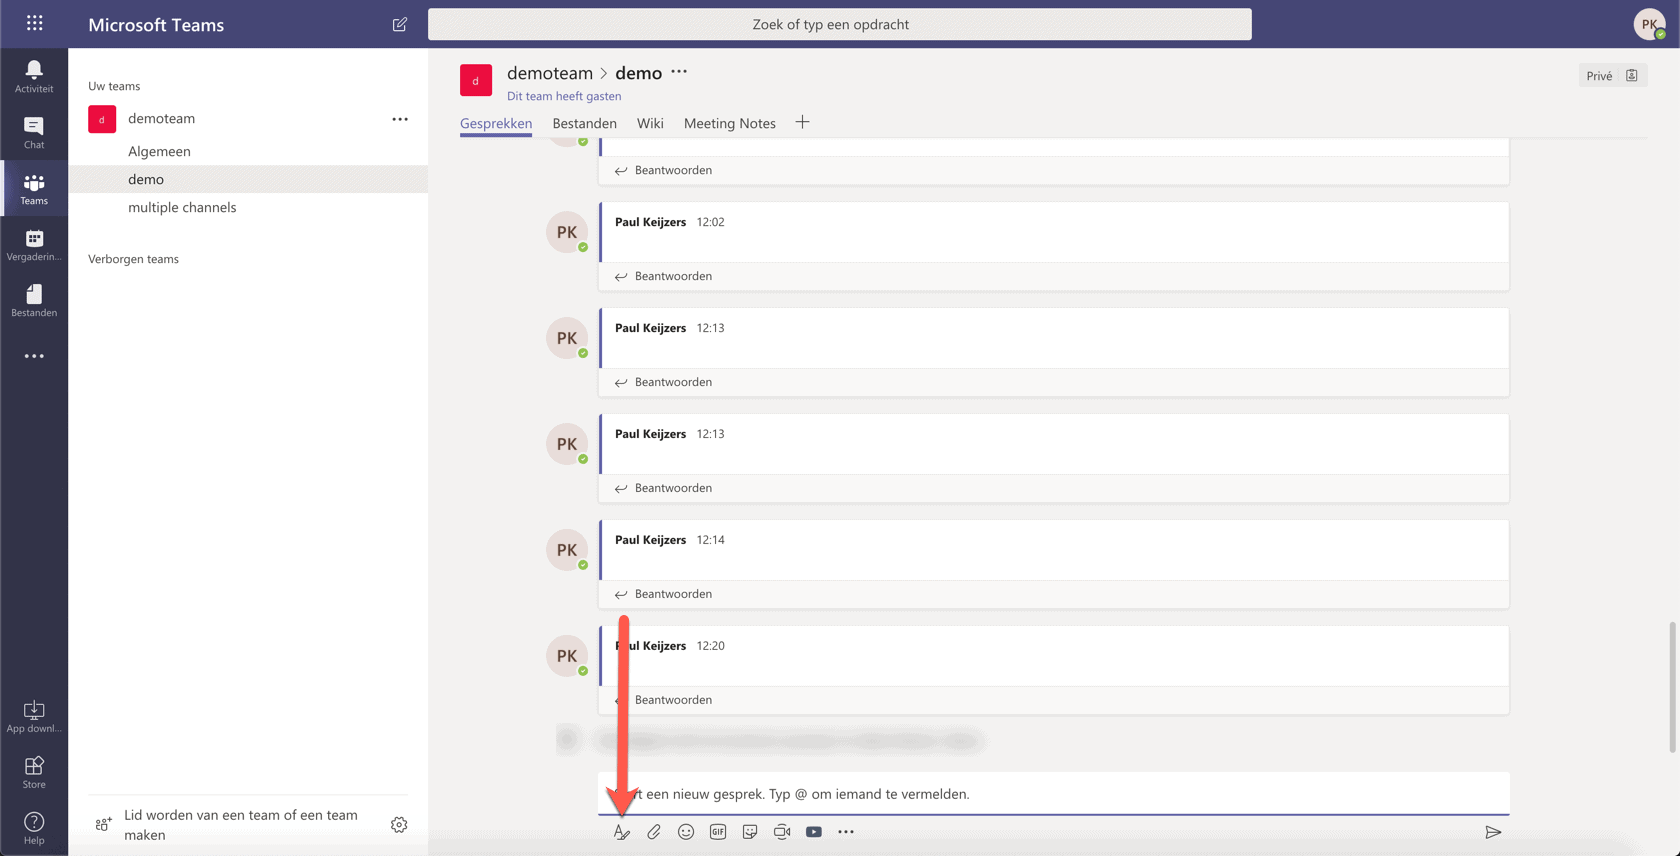 formating in Microsoft teams